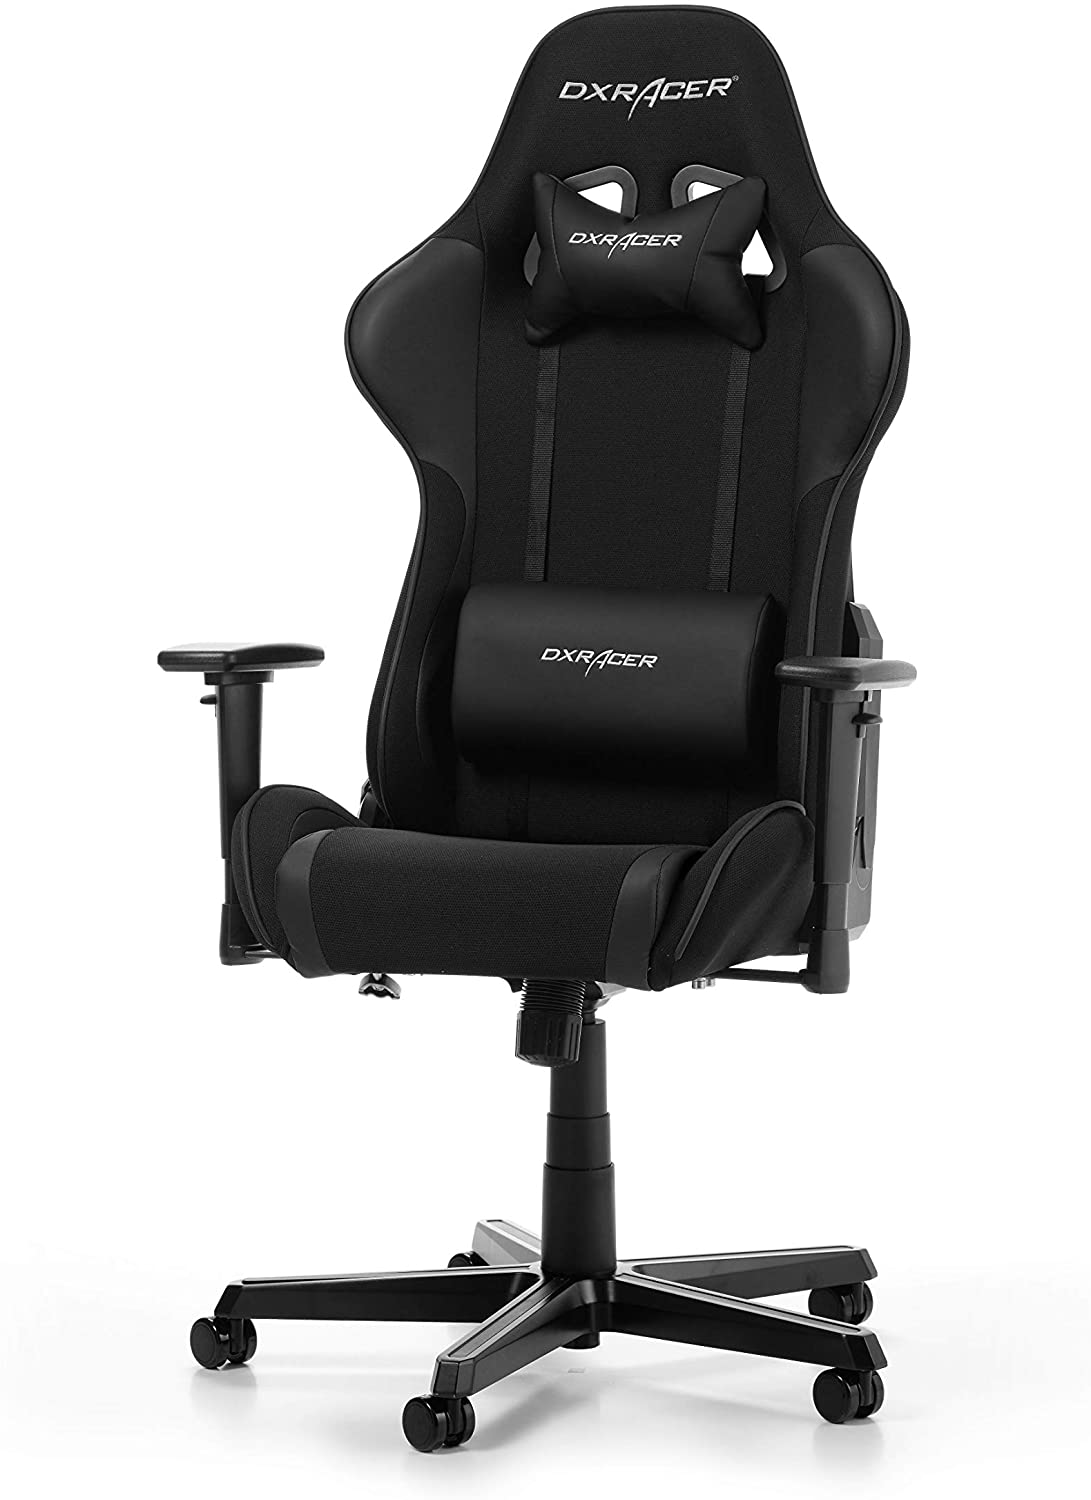 DXRacer F11 chaise gaming